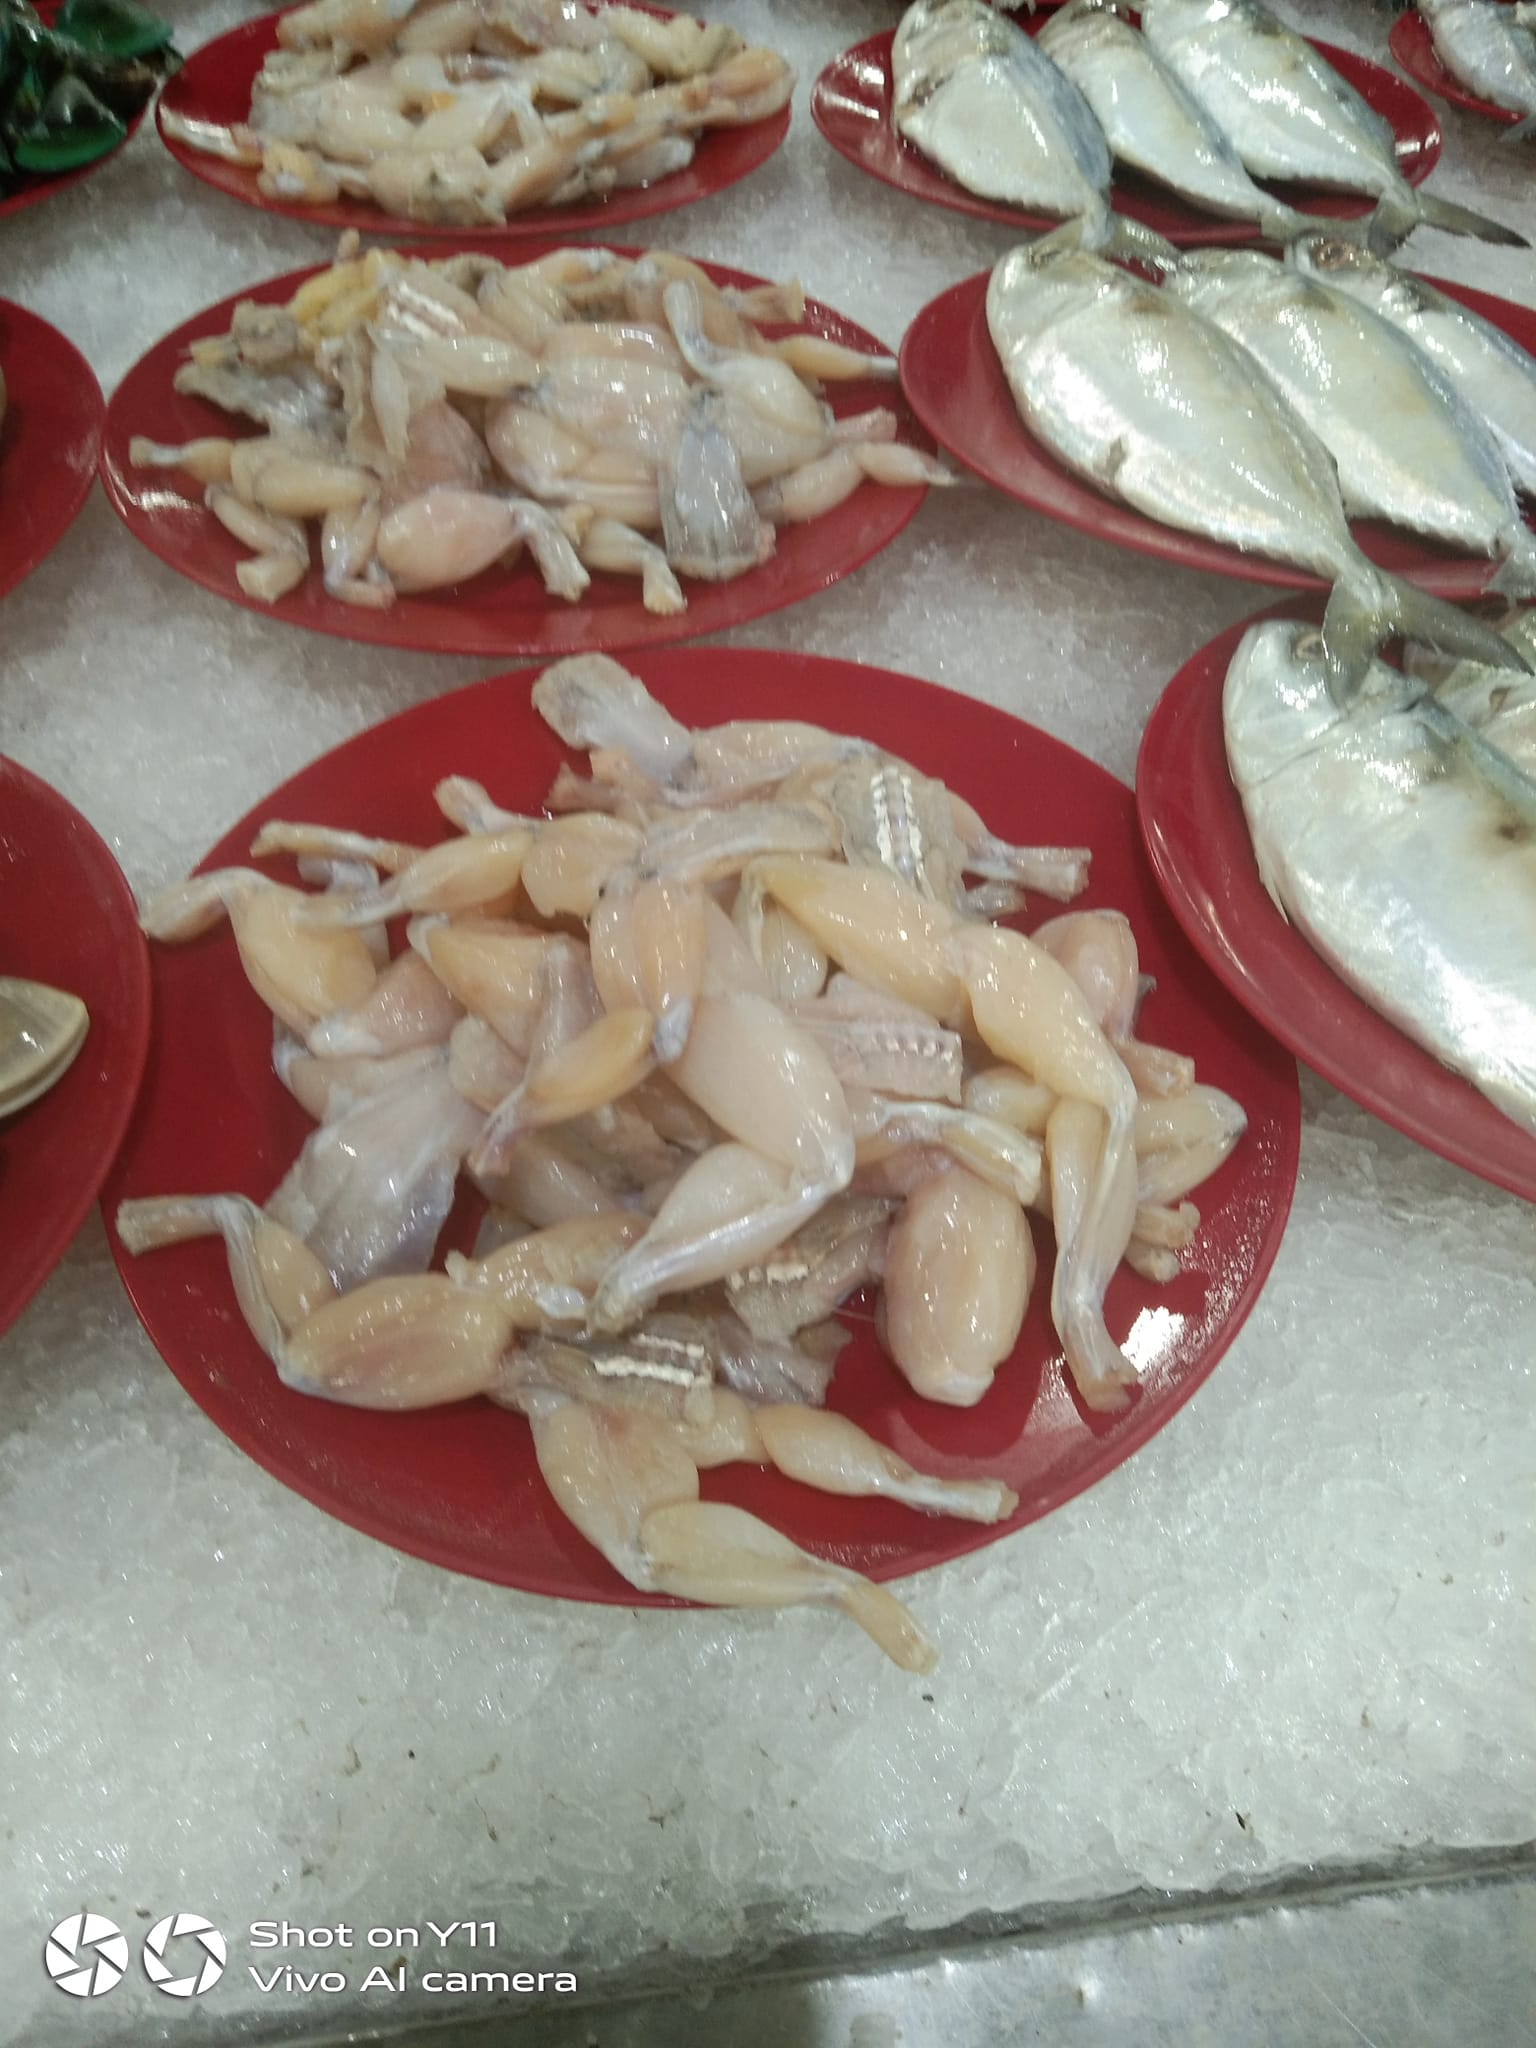 Frog meat that was found was placed in the same area as the fish at nsk selayang.